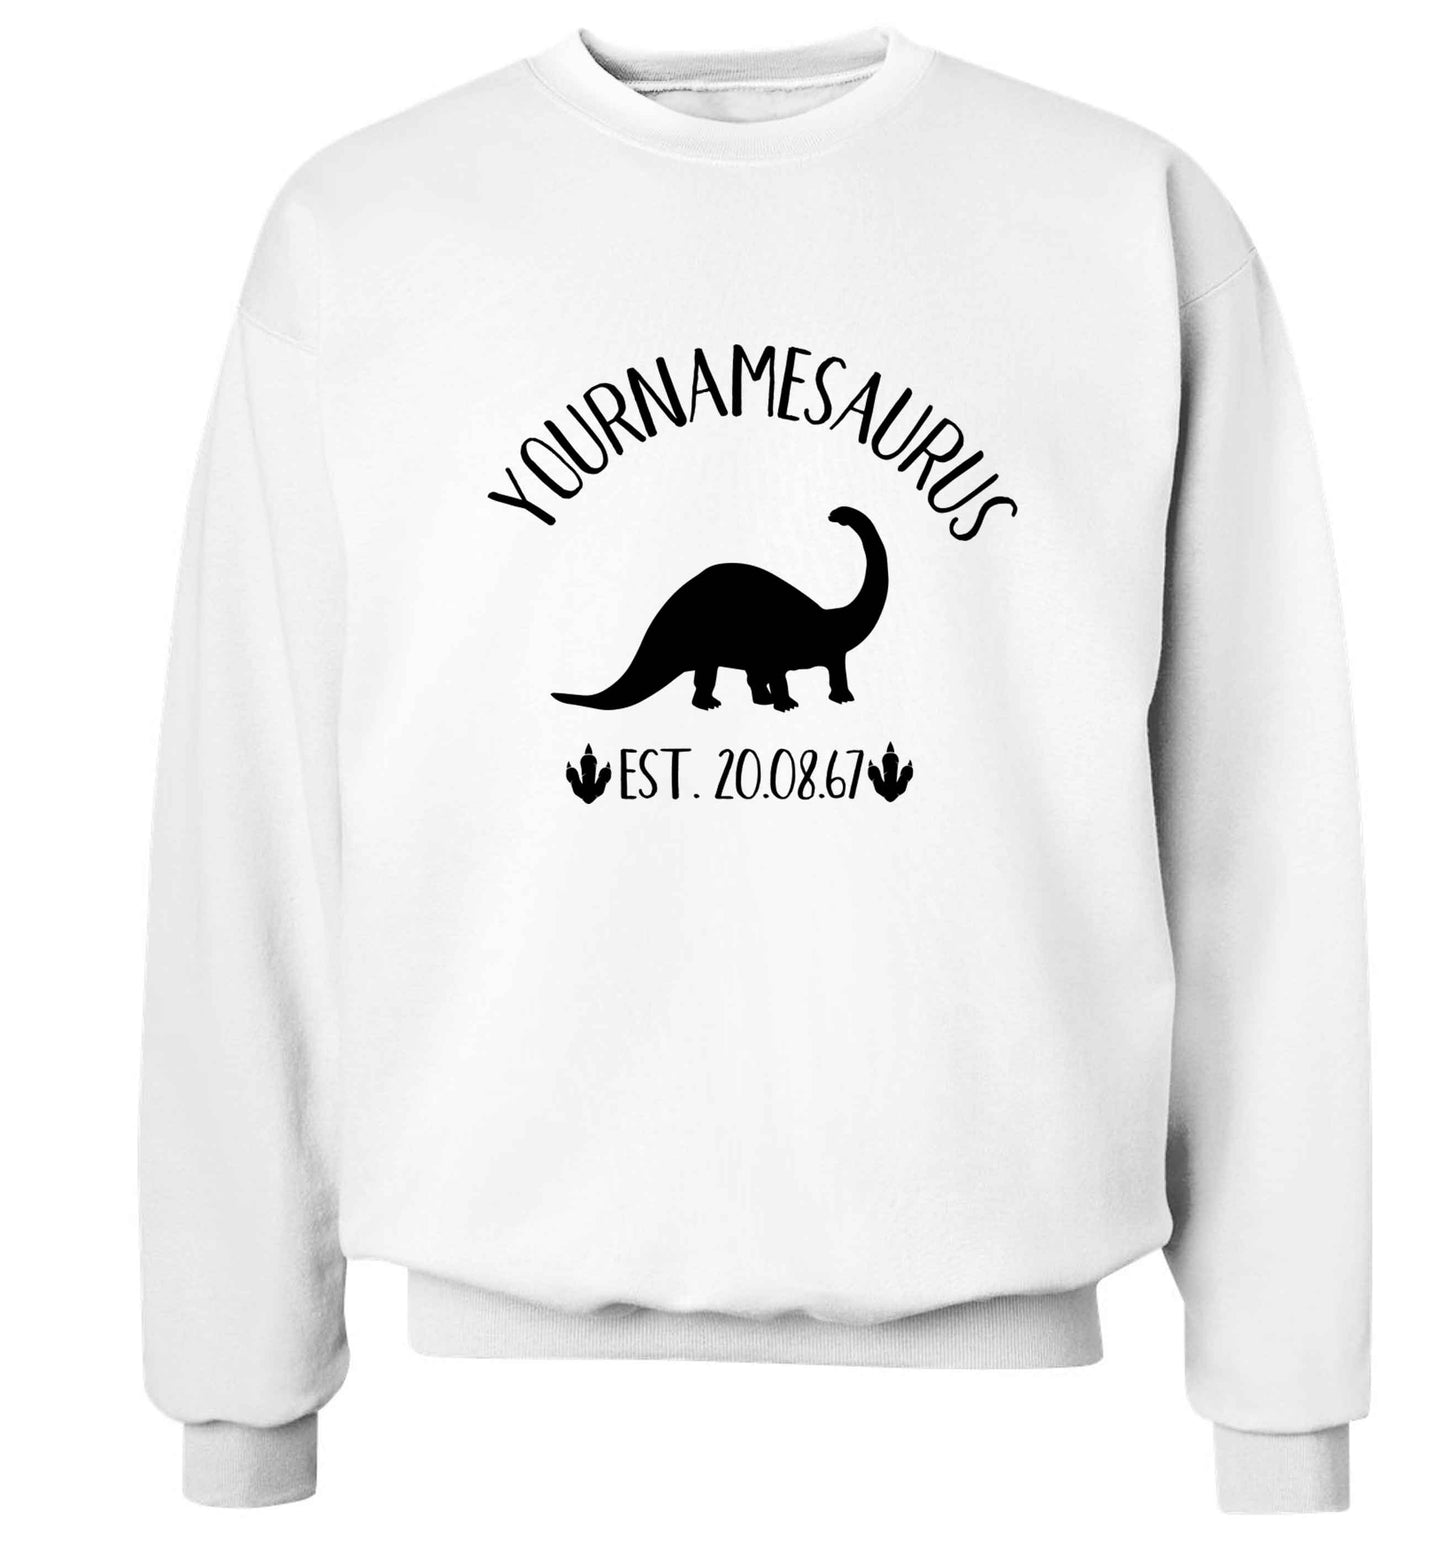 Personalised (your name) dinosaur birthday Adult's unisex white Sweater 2XL